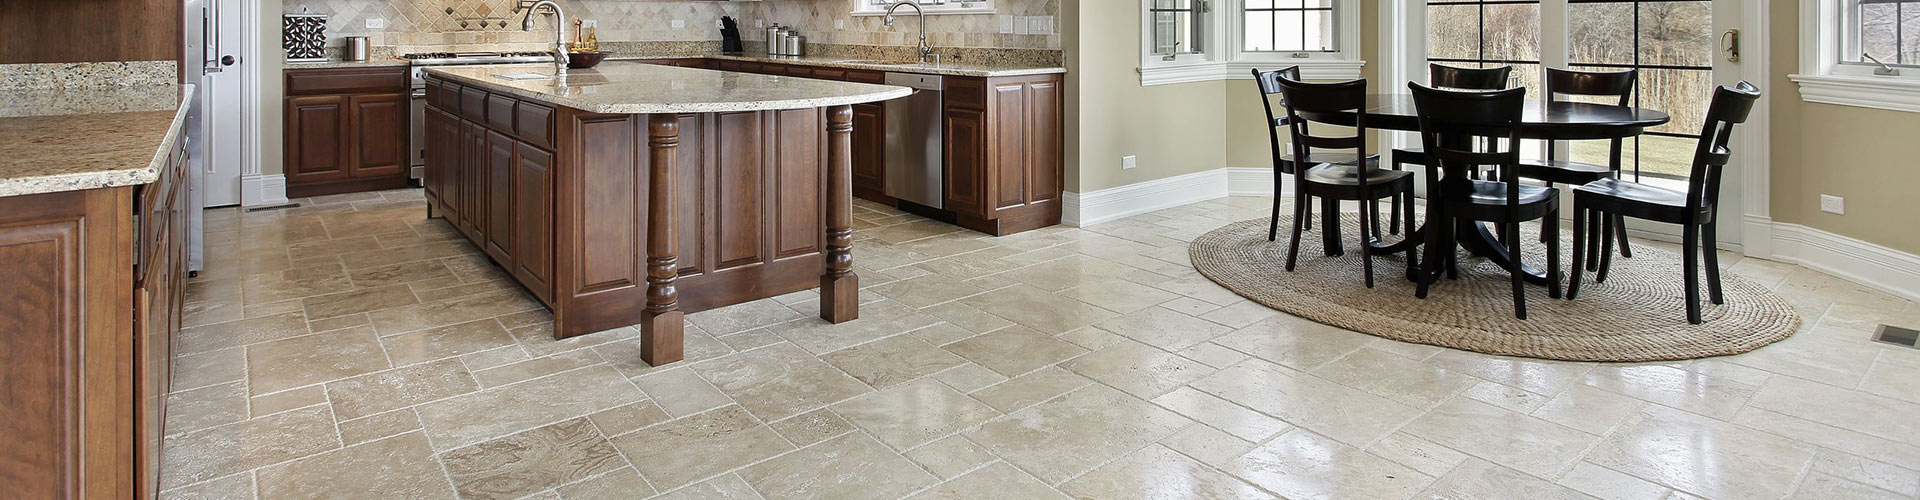 tile and grout cleaning near Ogden and Salt Lake City